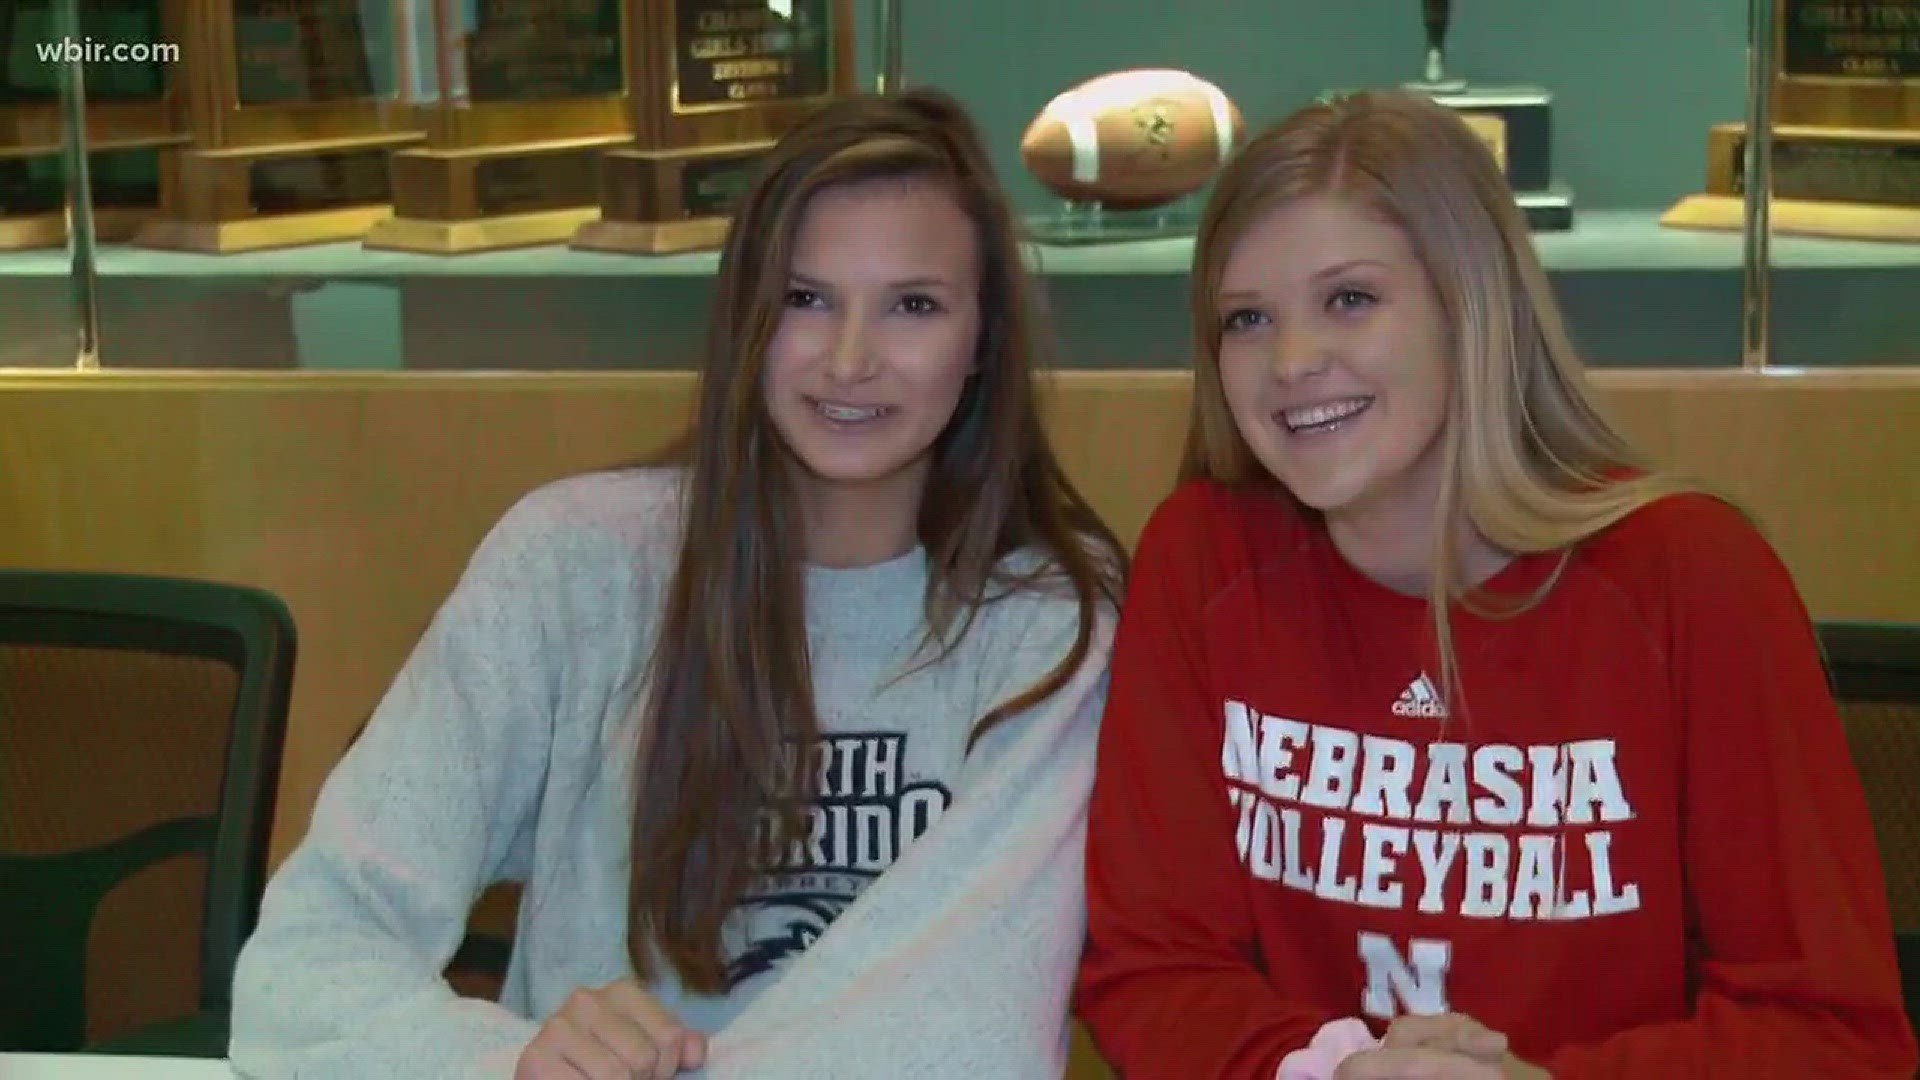 From North Florida to Nebraska, Webb Volleyball dynasty spreads its wings.